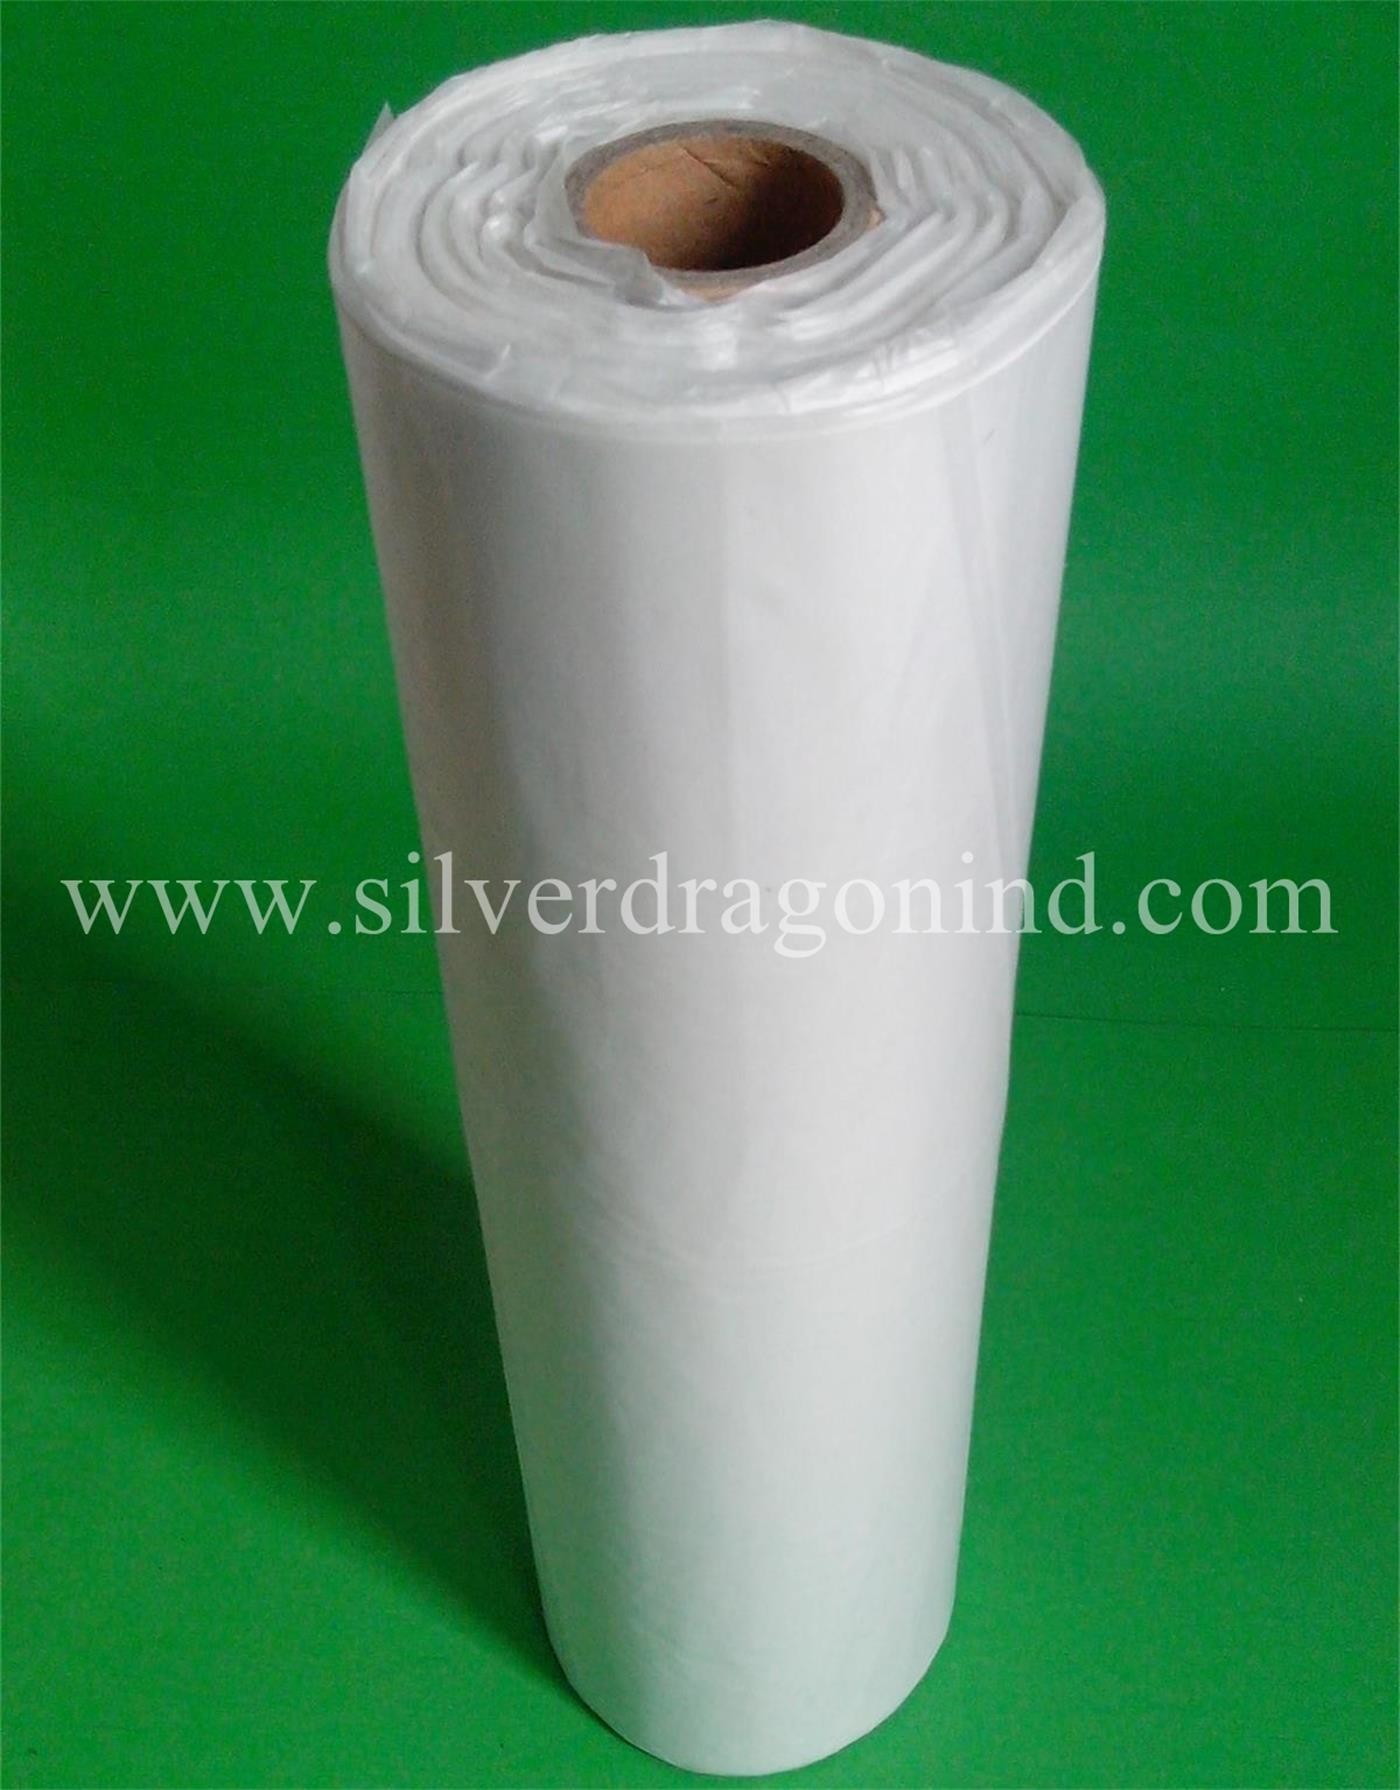 Natural Produce bags on rolls, made of HDPE material, widely used in supermarket